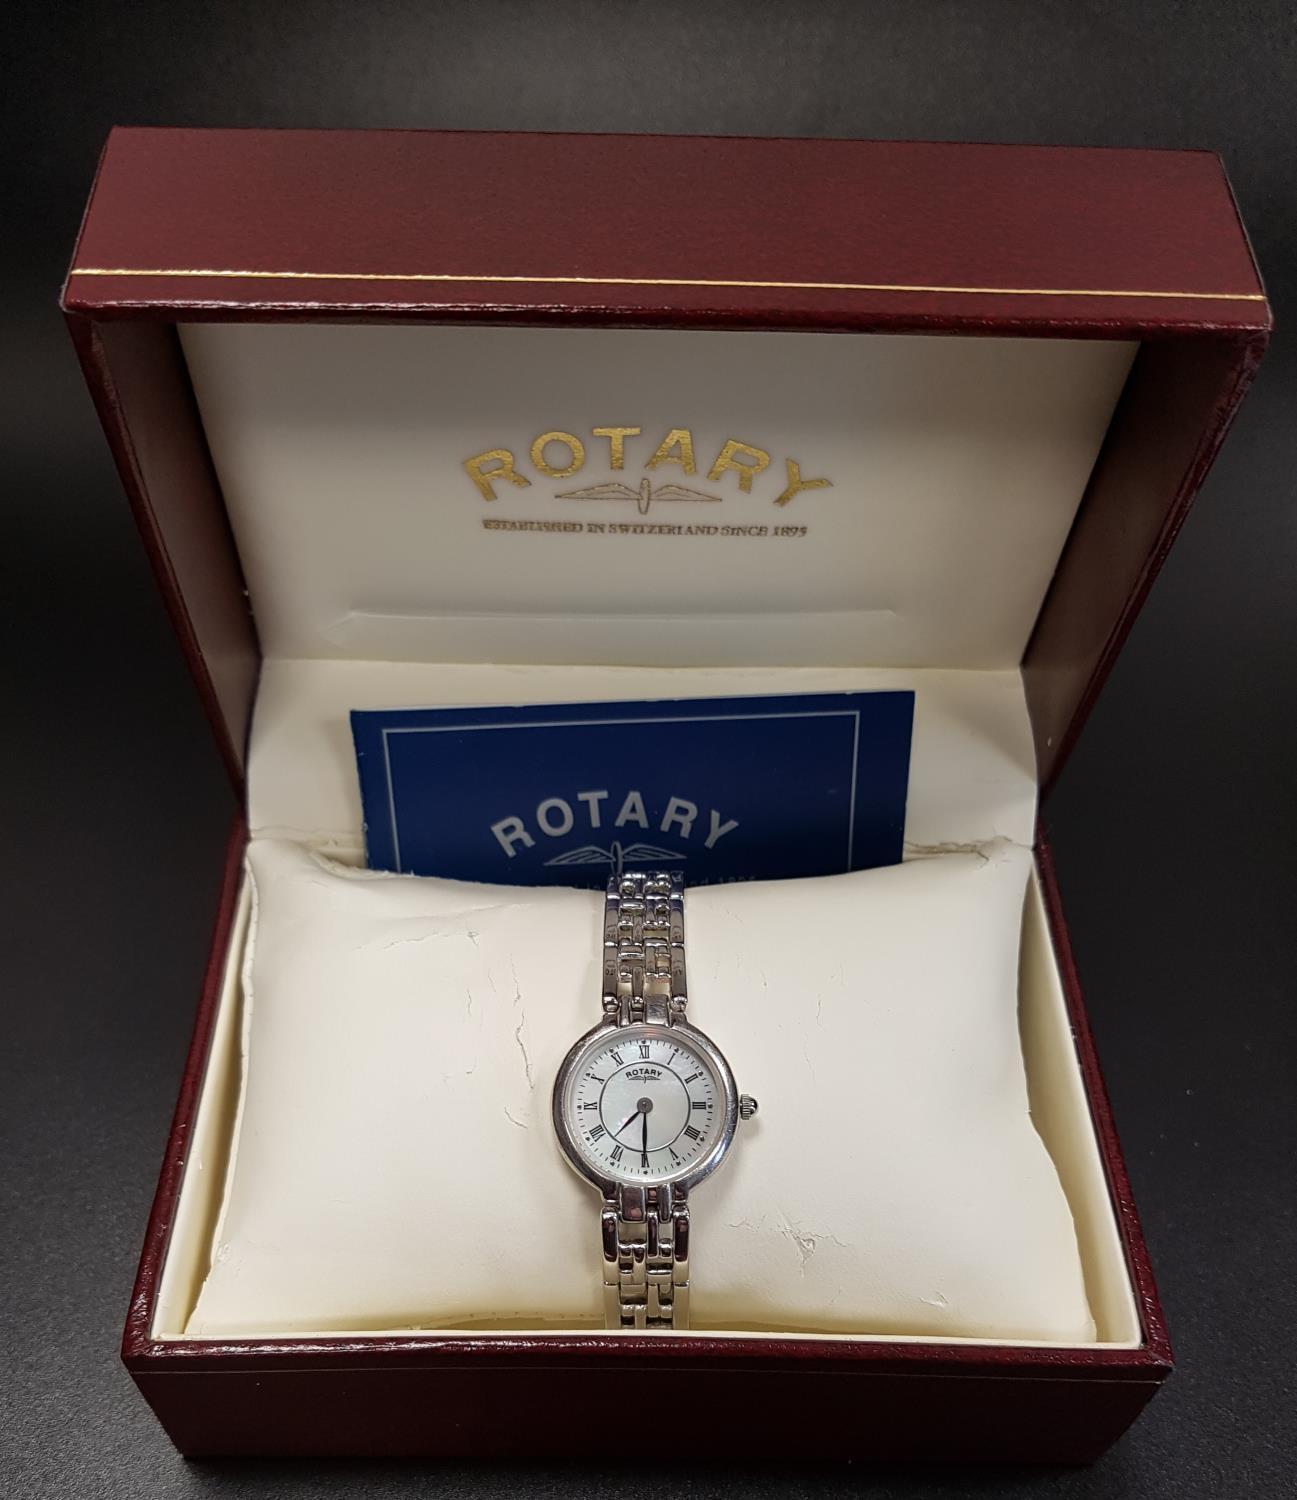 LADIES SILVER CASED ROTARY WRISTWATCH the mother of pearl dial with Roman numerals, on silver